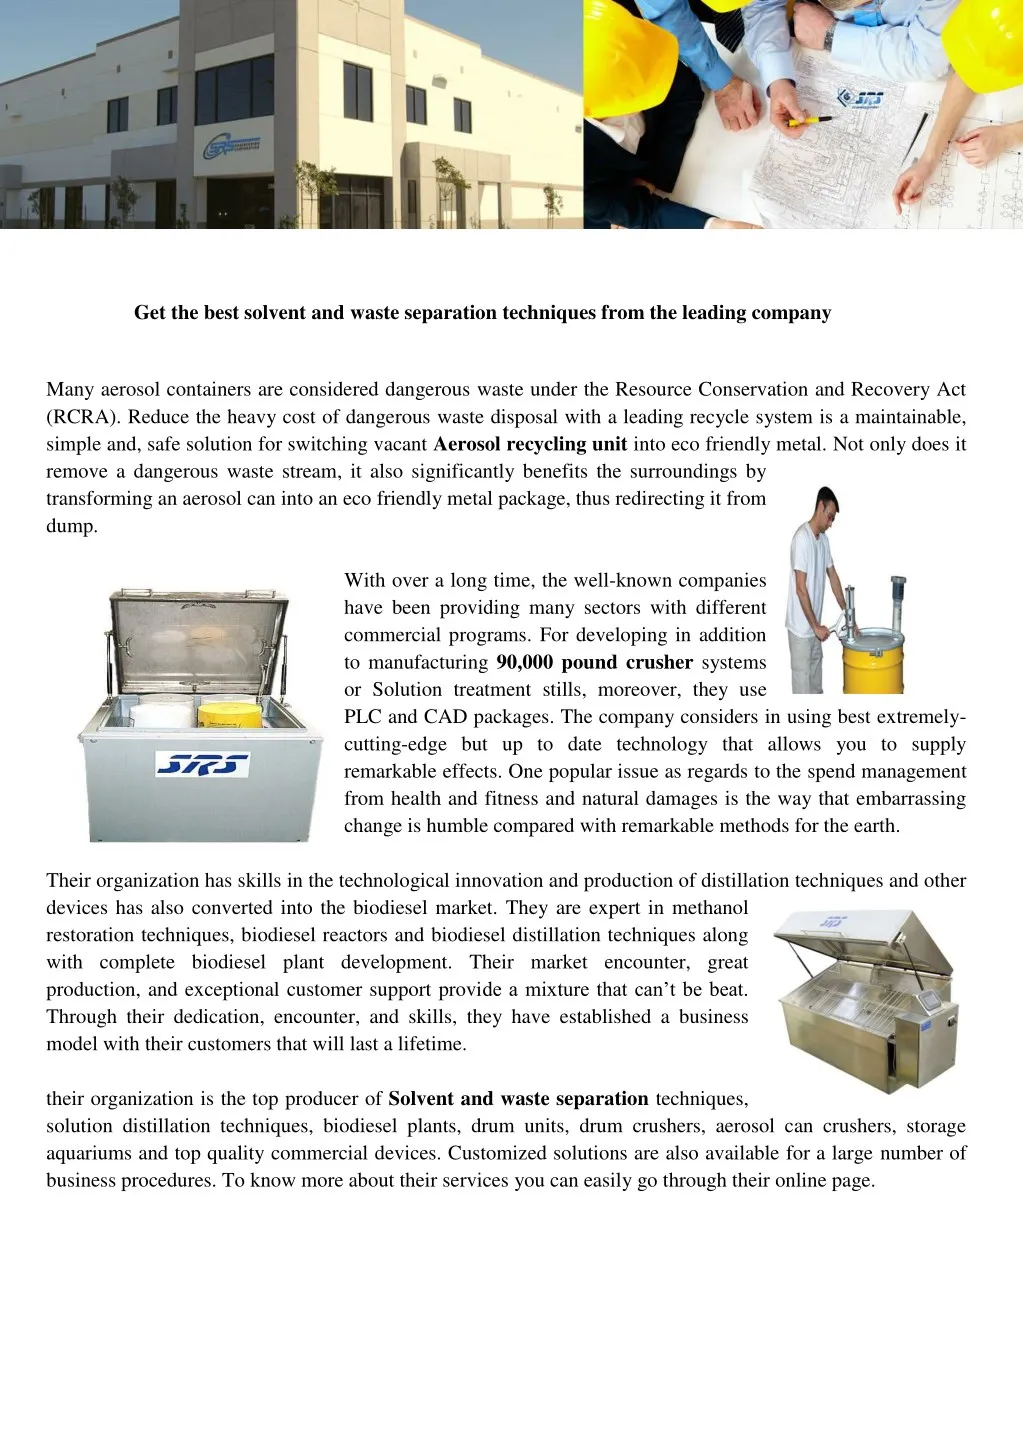 get the best solvent and waste separation